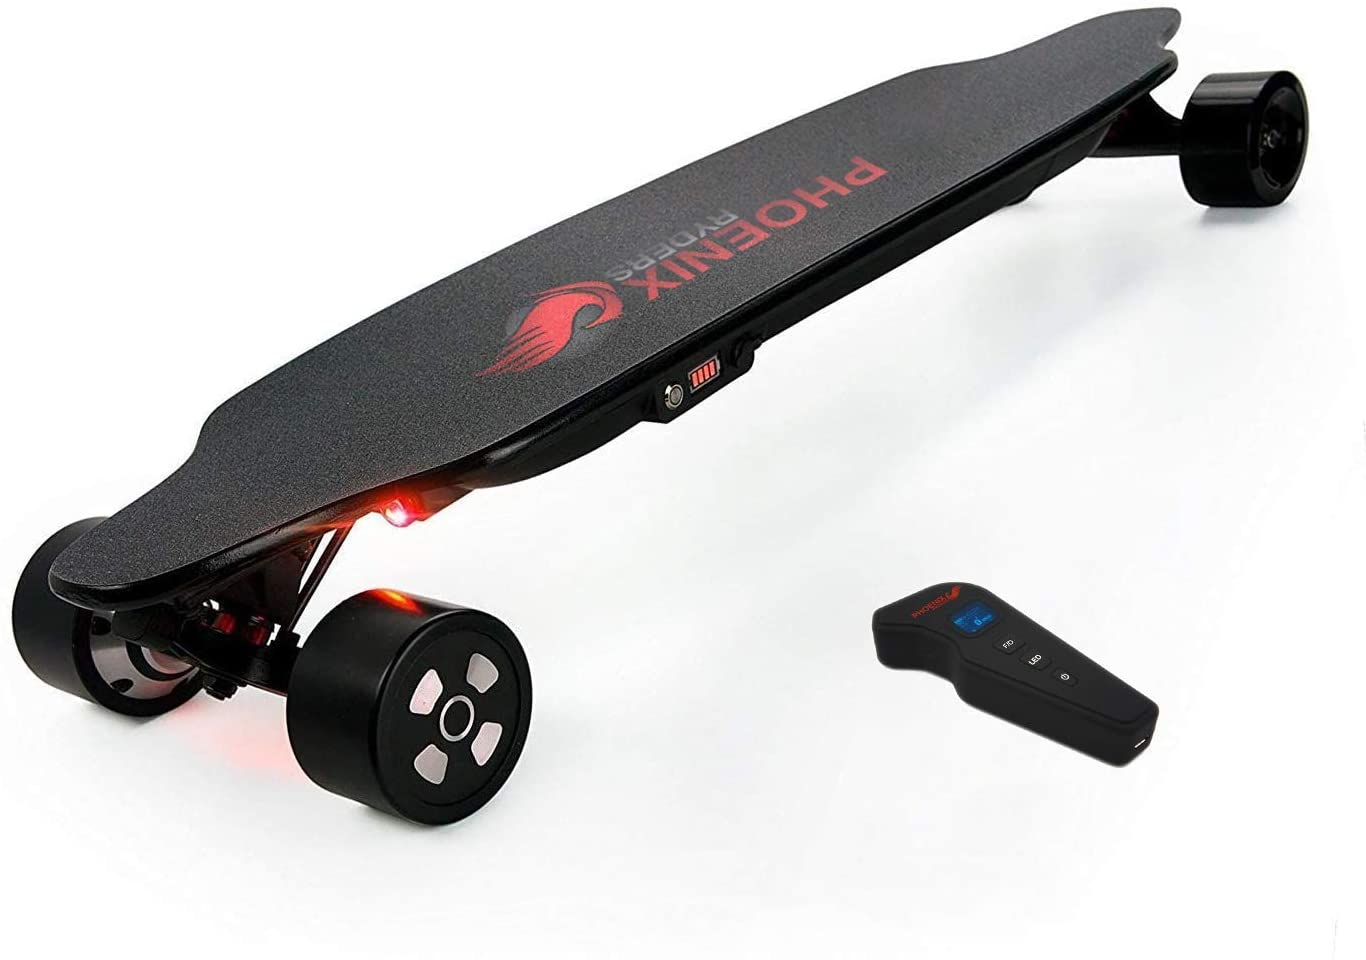 PHOENIX RYDERS LED Taillight Electric Skateboard, 38 x 9.5-Inch